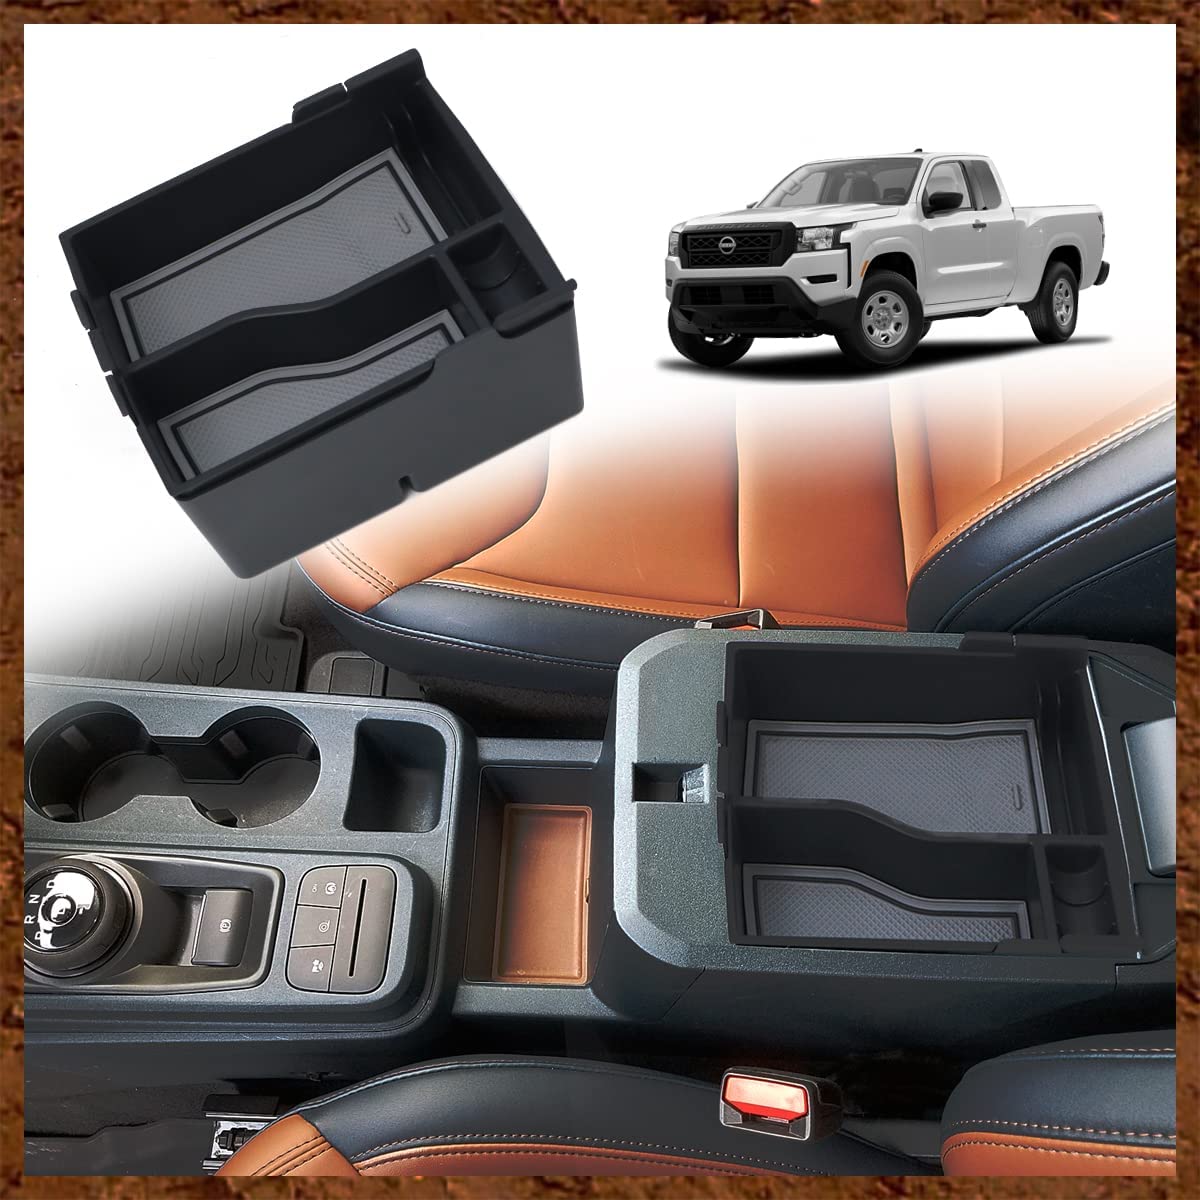 Center Console Storage Tray with PVC Insert Mats for 2022-2023 Maverick